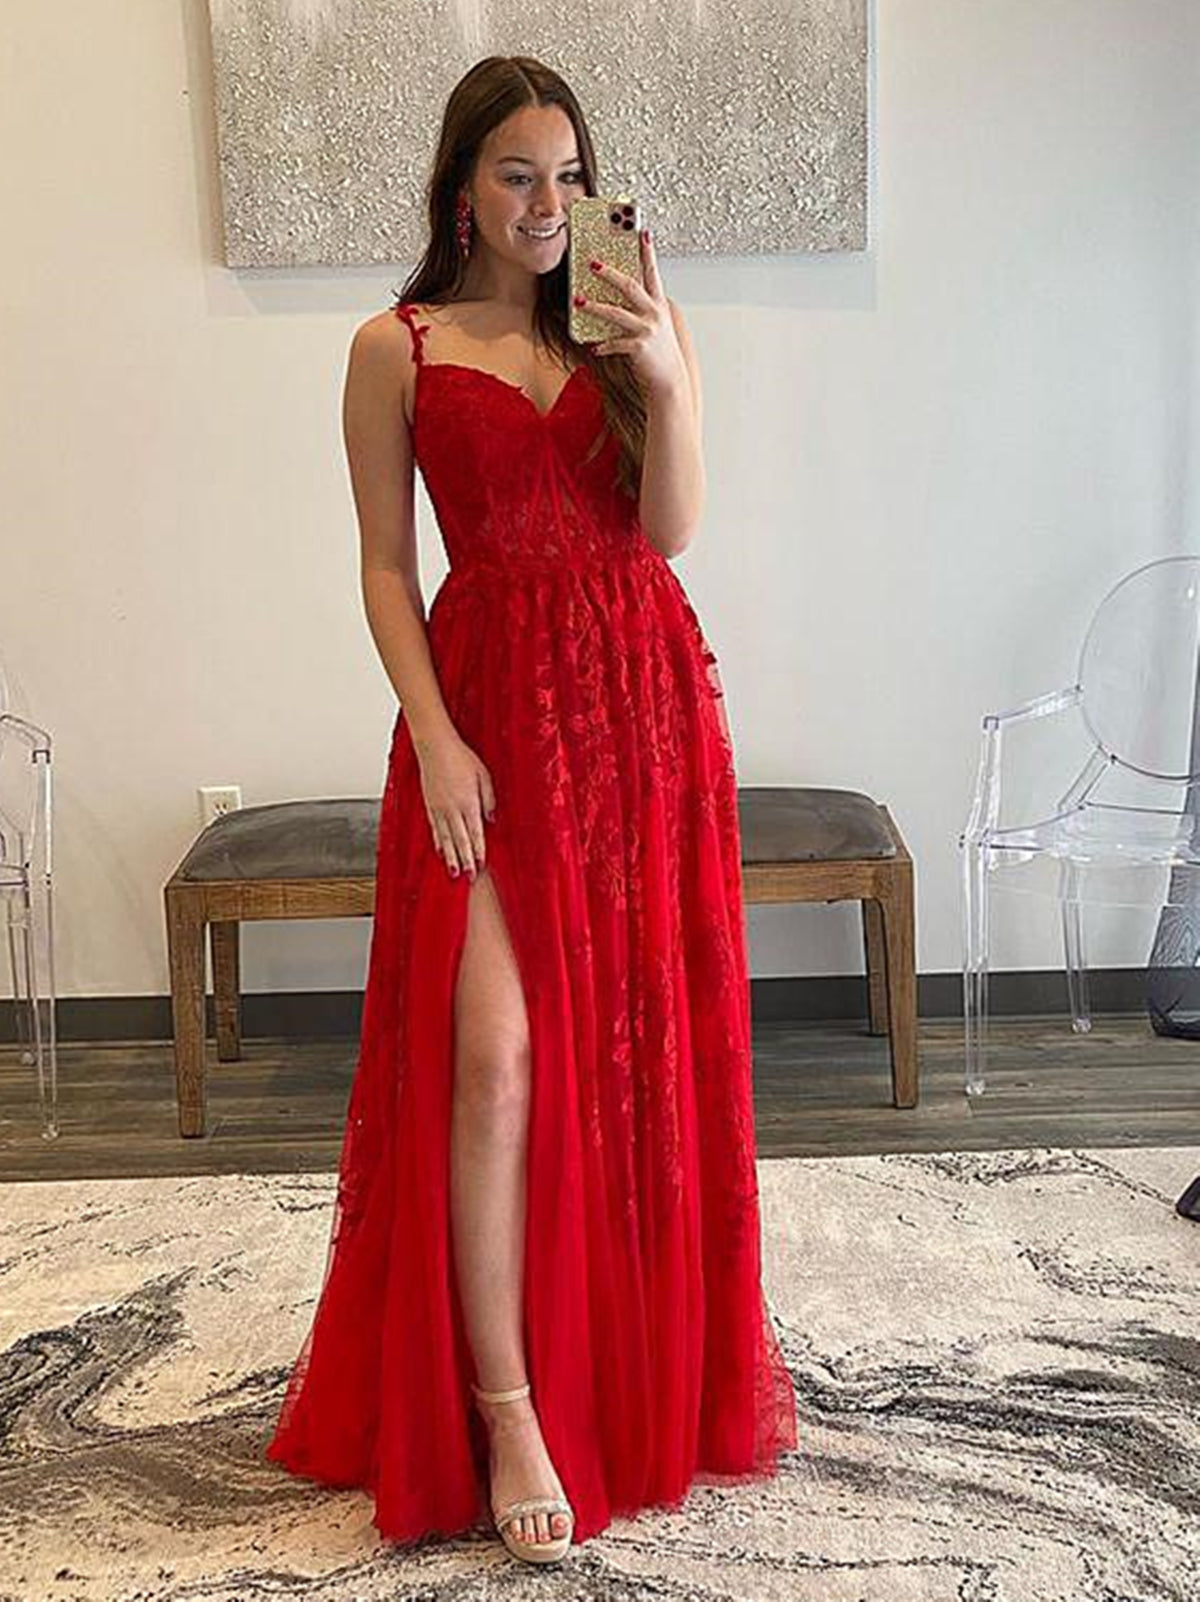 Spaghetti Straps Scarlet Red Lace Tulle Prom Dress - Xdressy